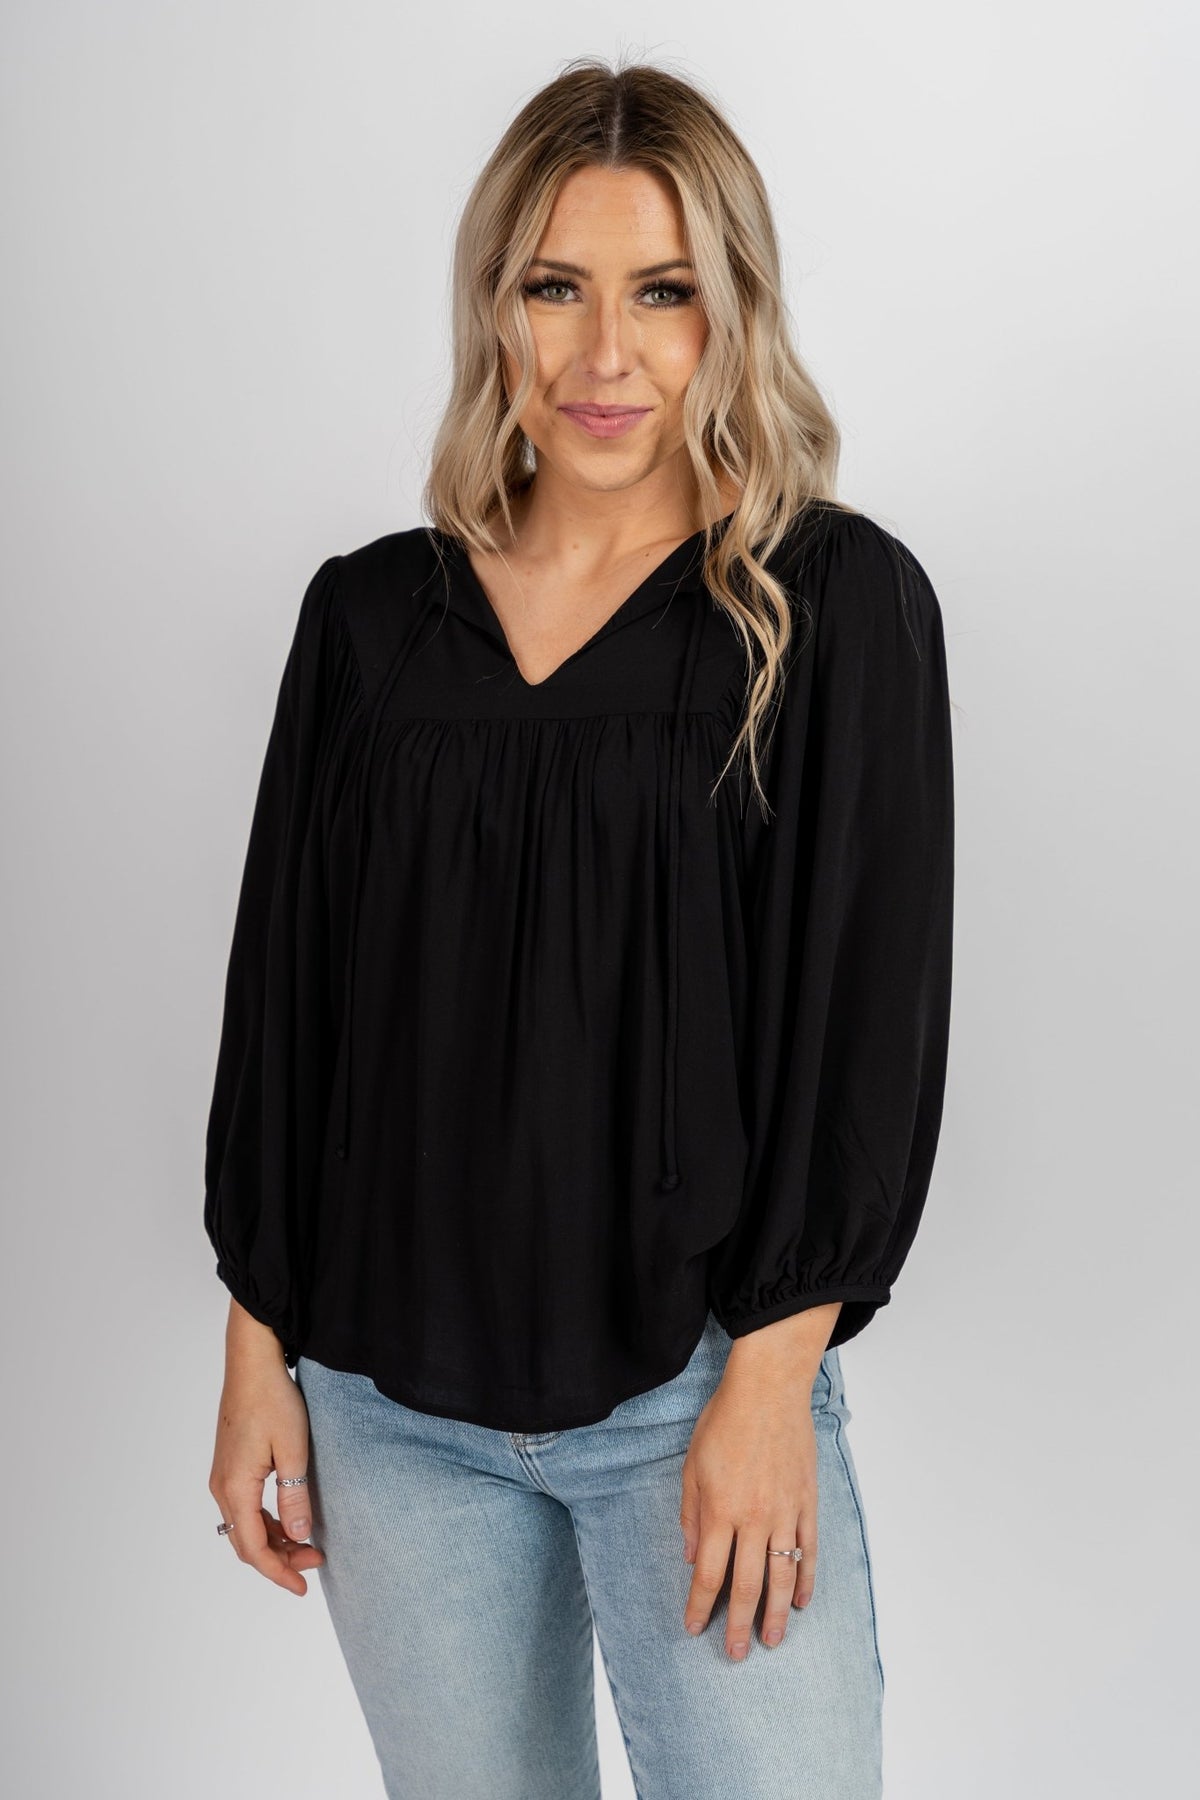 Z Supply Eden top black - Z Supply Top - Z Supply Tops, Dresses, Tanks, Tees, Cardigans, Joggers and Loungewear at Lush Fashion Lounge